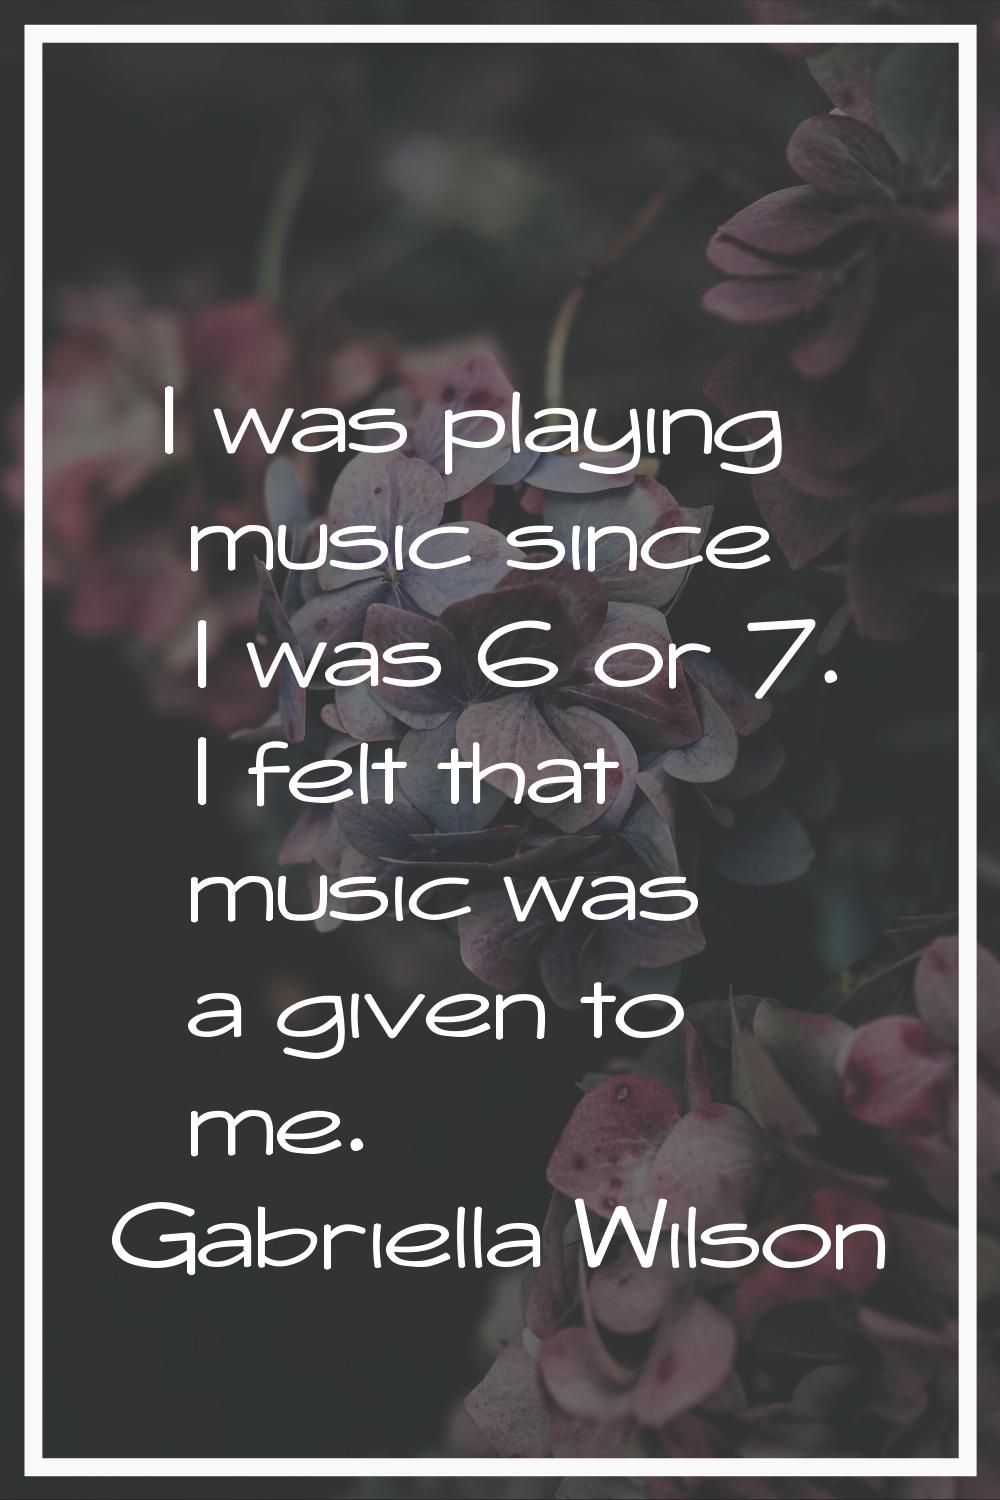 I was playing music since I was 6 or 7. I felt that music was a given to me.